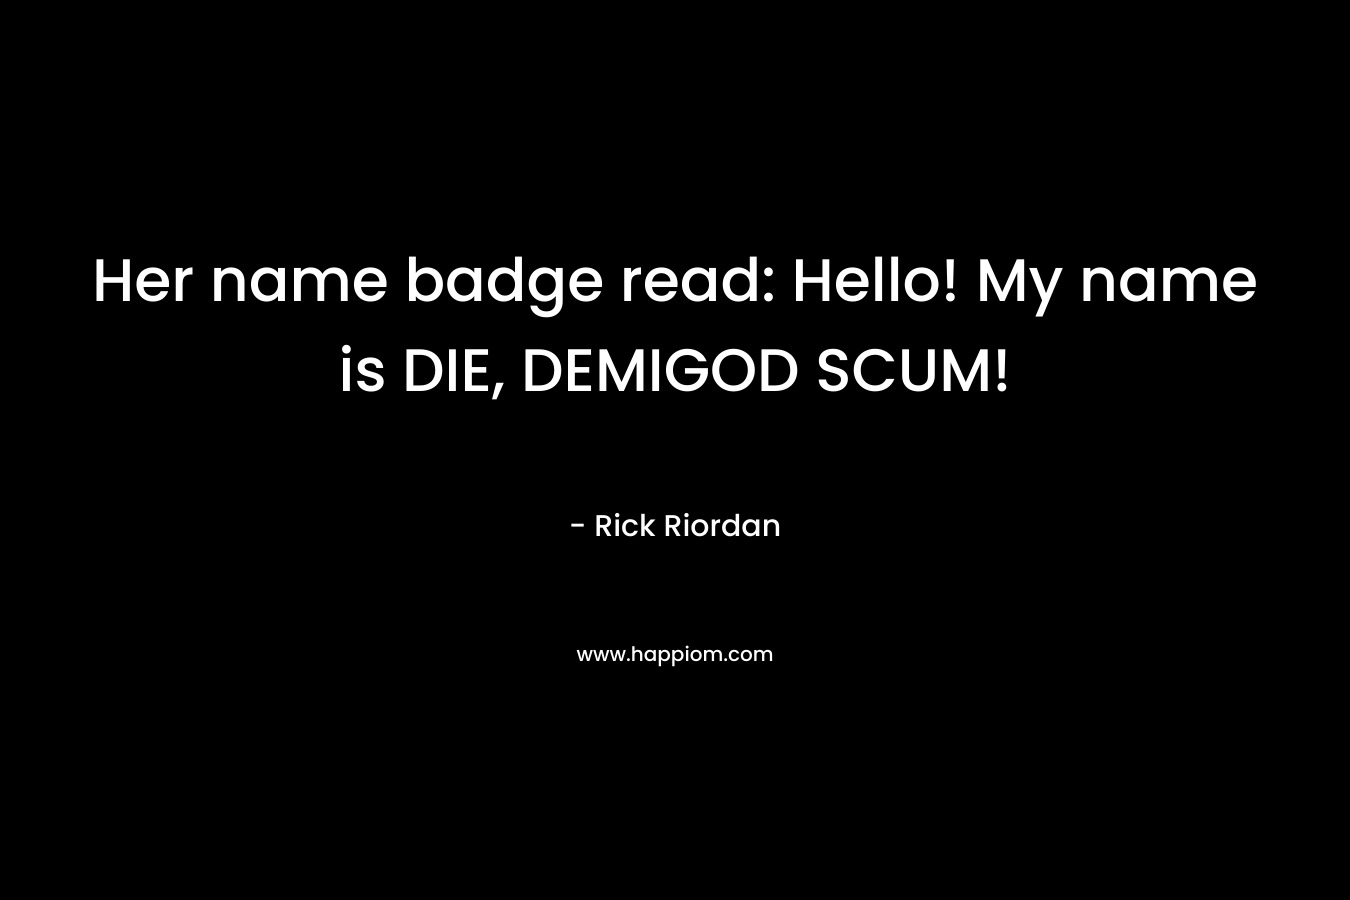 Her name badge read: Hello! My name is DIE, DEMIGOD SCUM!